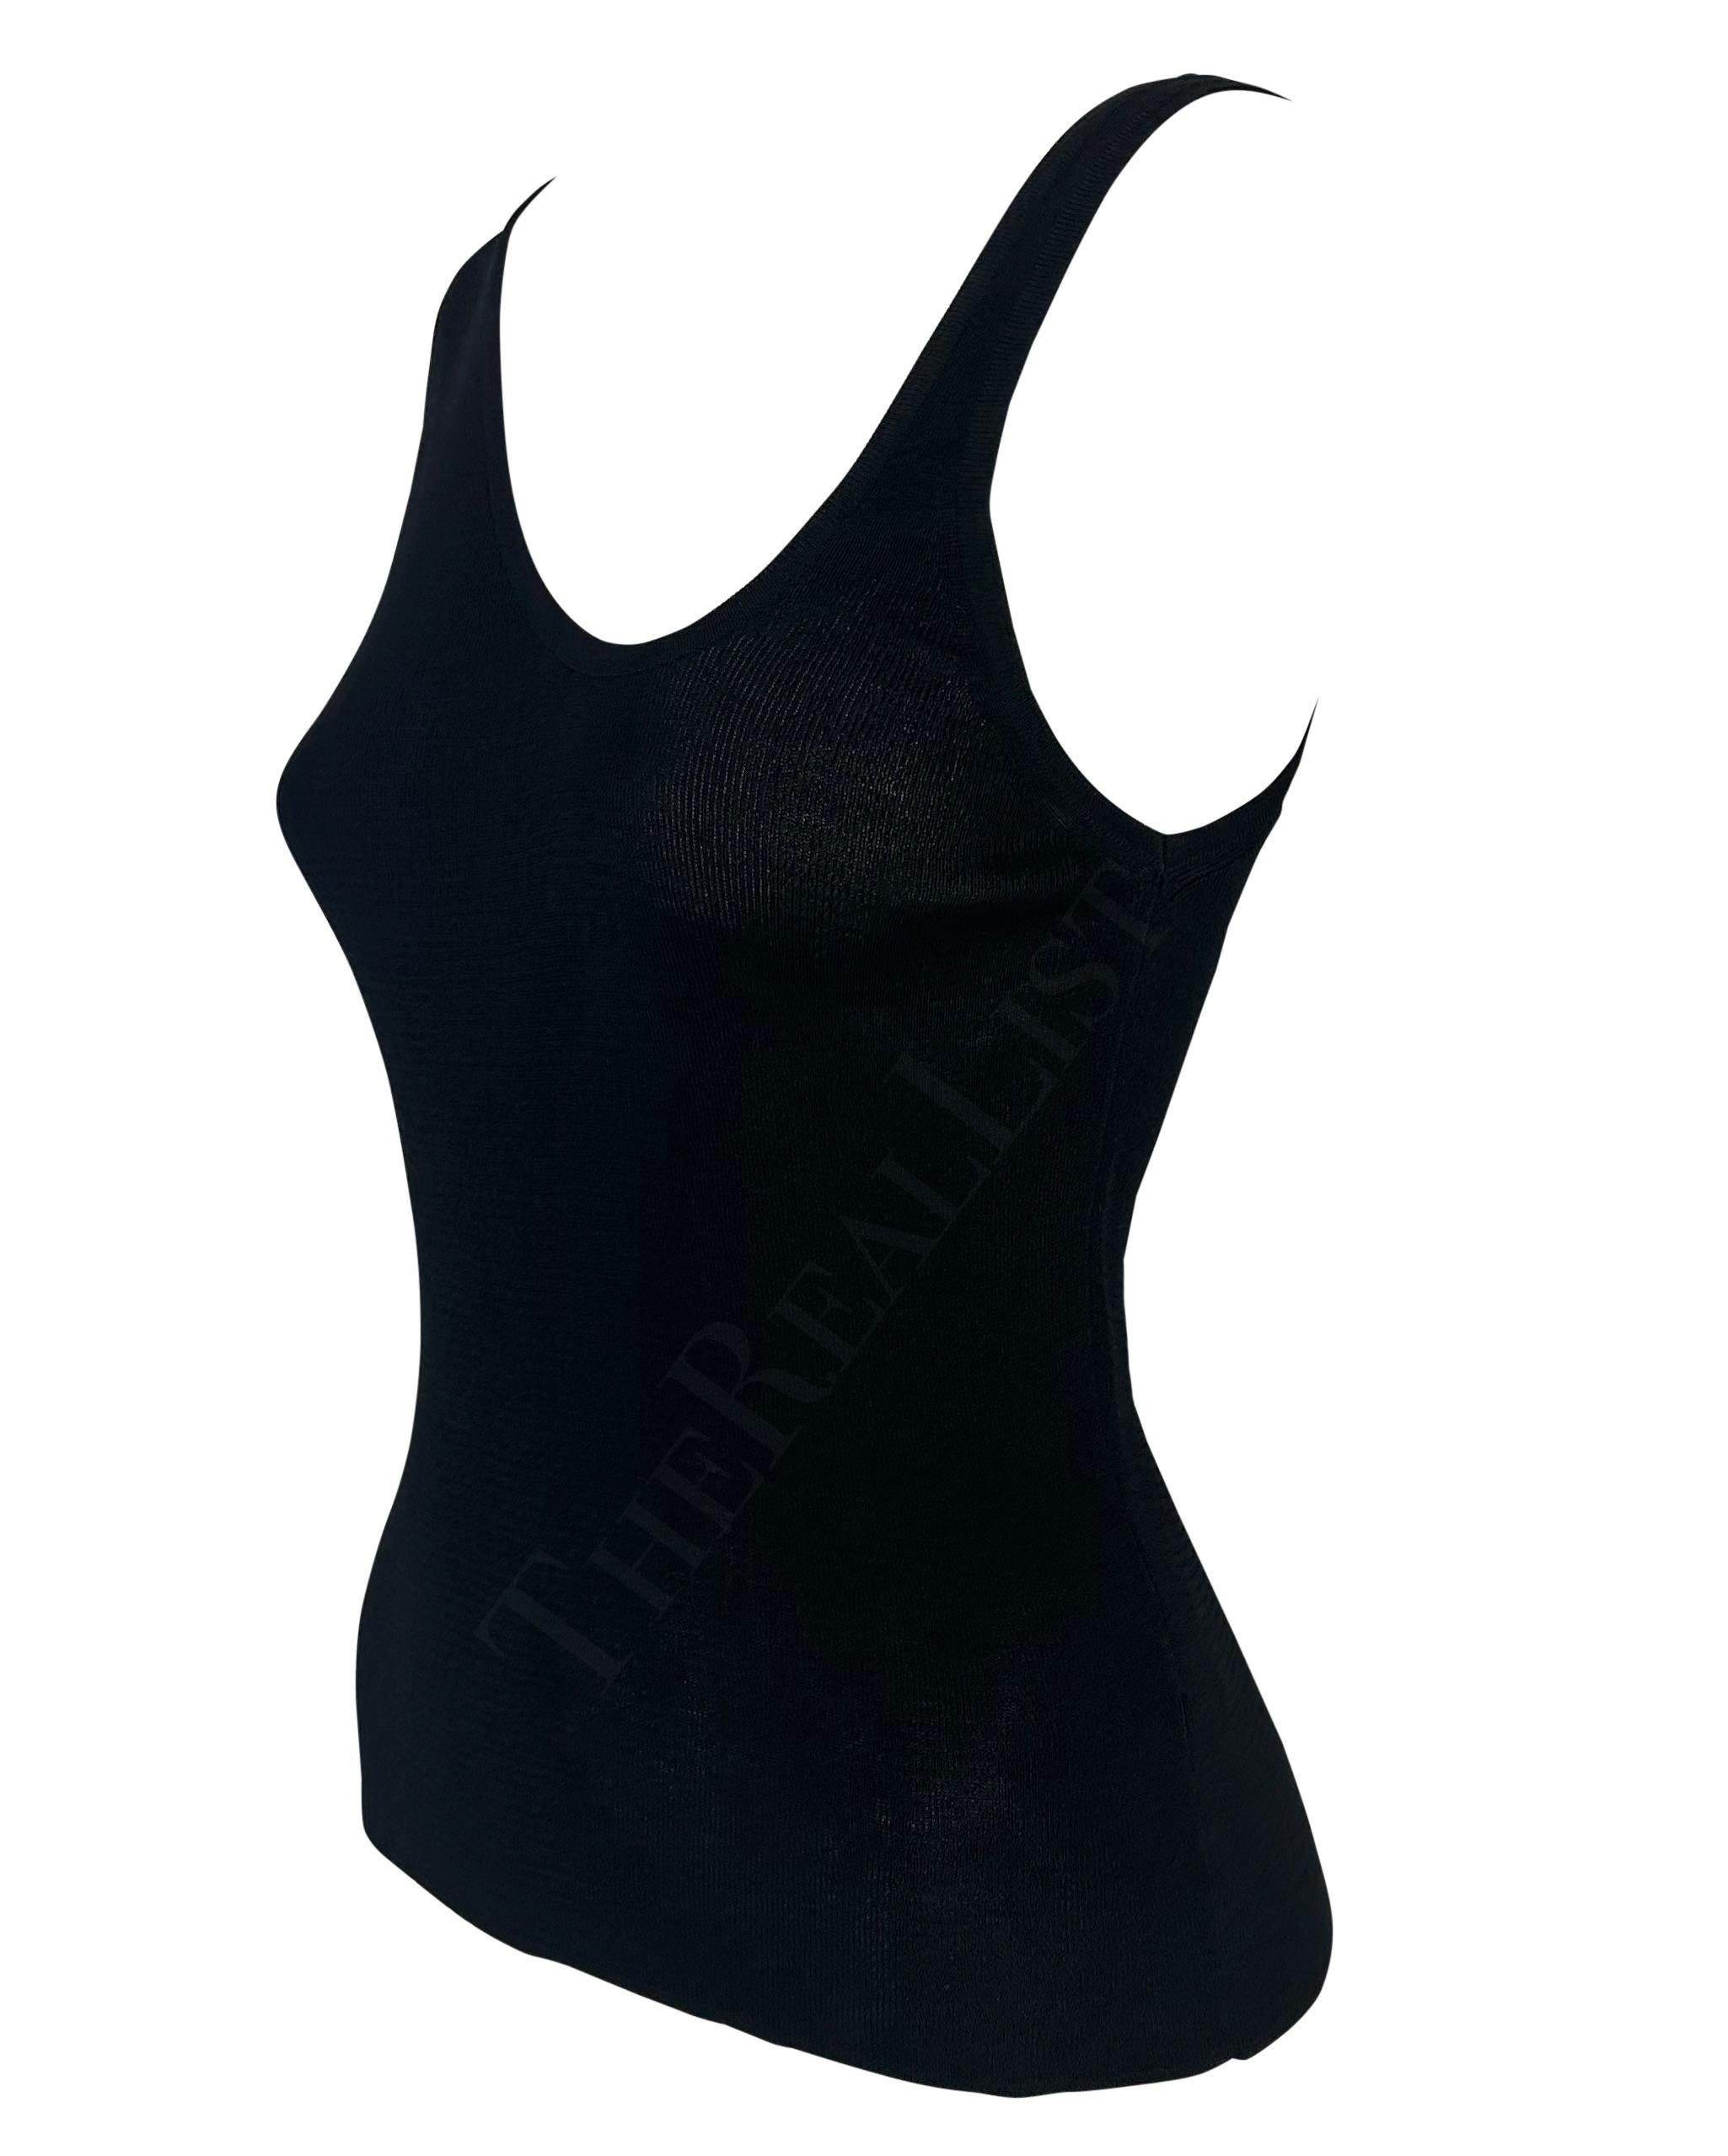 Presenting a fabulous knit black asymmetric Gucci tank top, designed by Tom Ford. Embrace the essence of refined allure with this elevated tank top from the Spring/Summer 1998 collection. Crafted with meticulous attention to detail, it showcases a